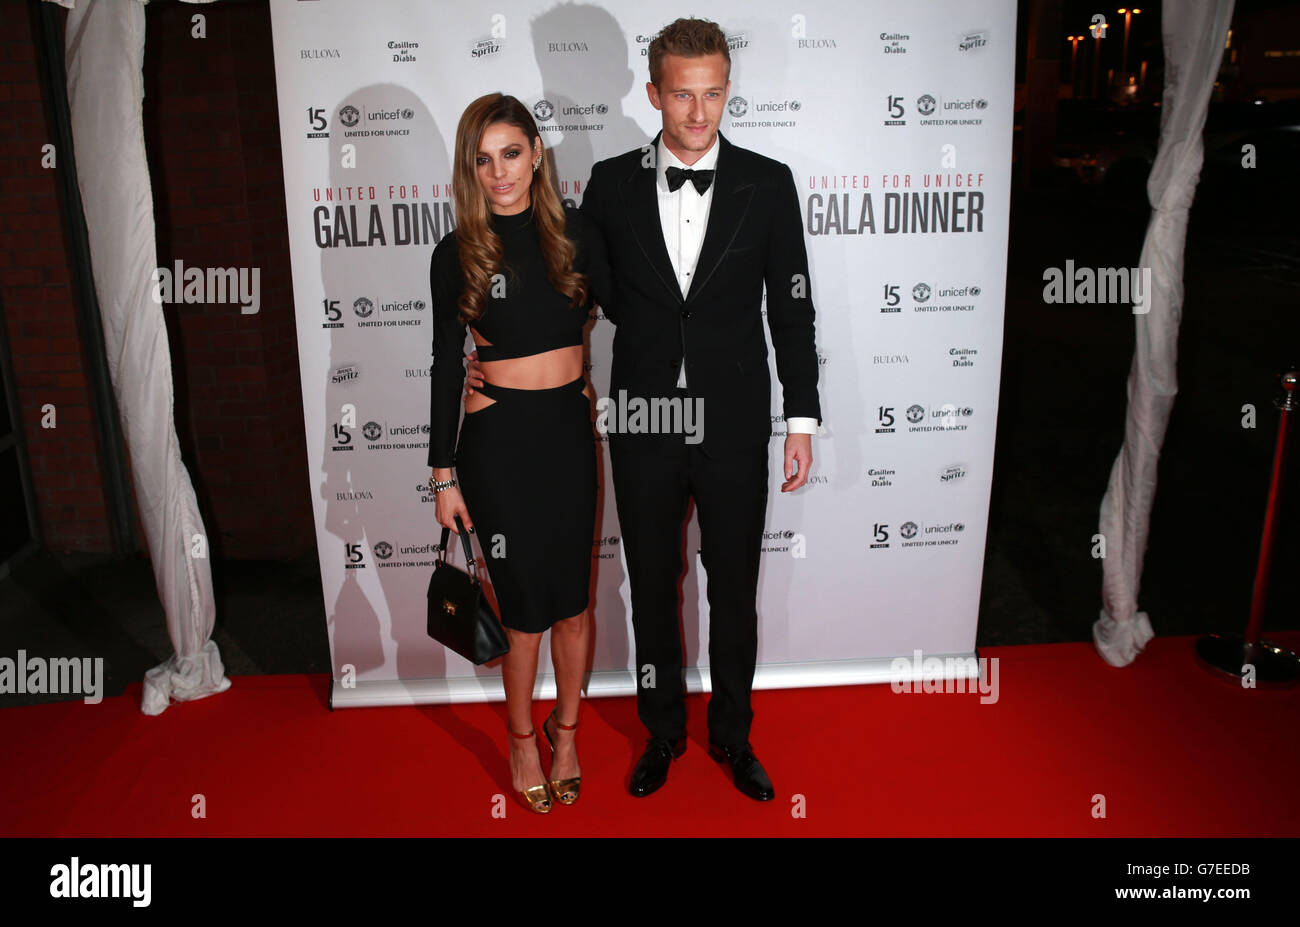 Anders Lindegaard and his wife Misse Lindegaard arrive at the United for UNICEF Gala Dinner attended by the Manchester United first-team and VIP guests at Old Trafford, Manchester. Stock Photo